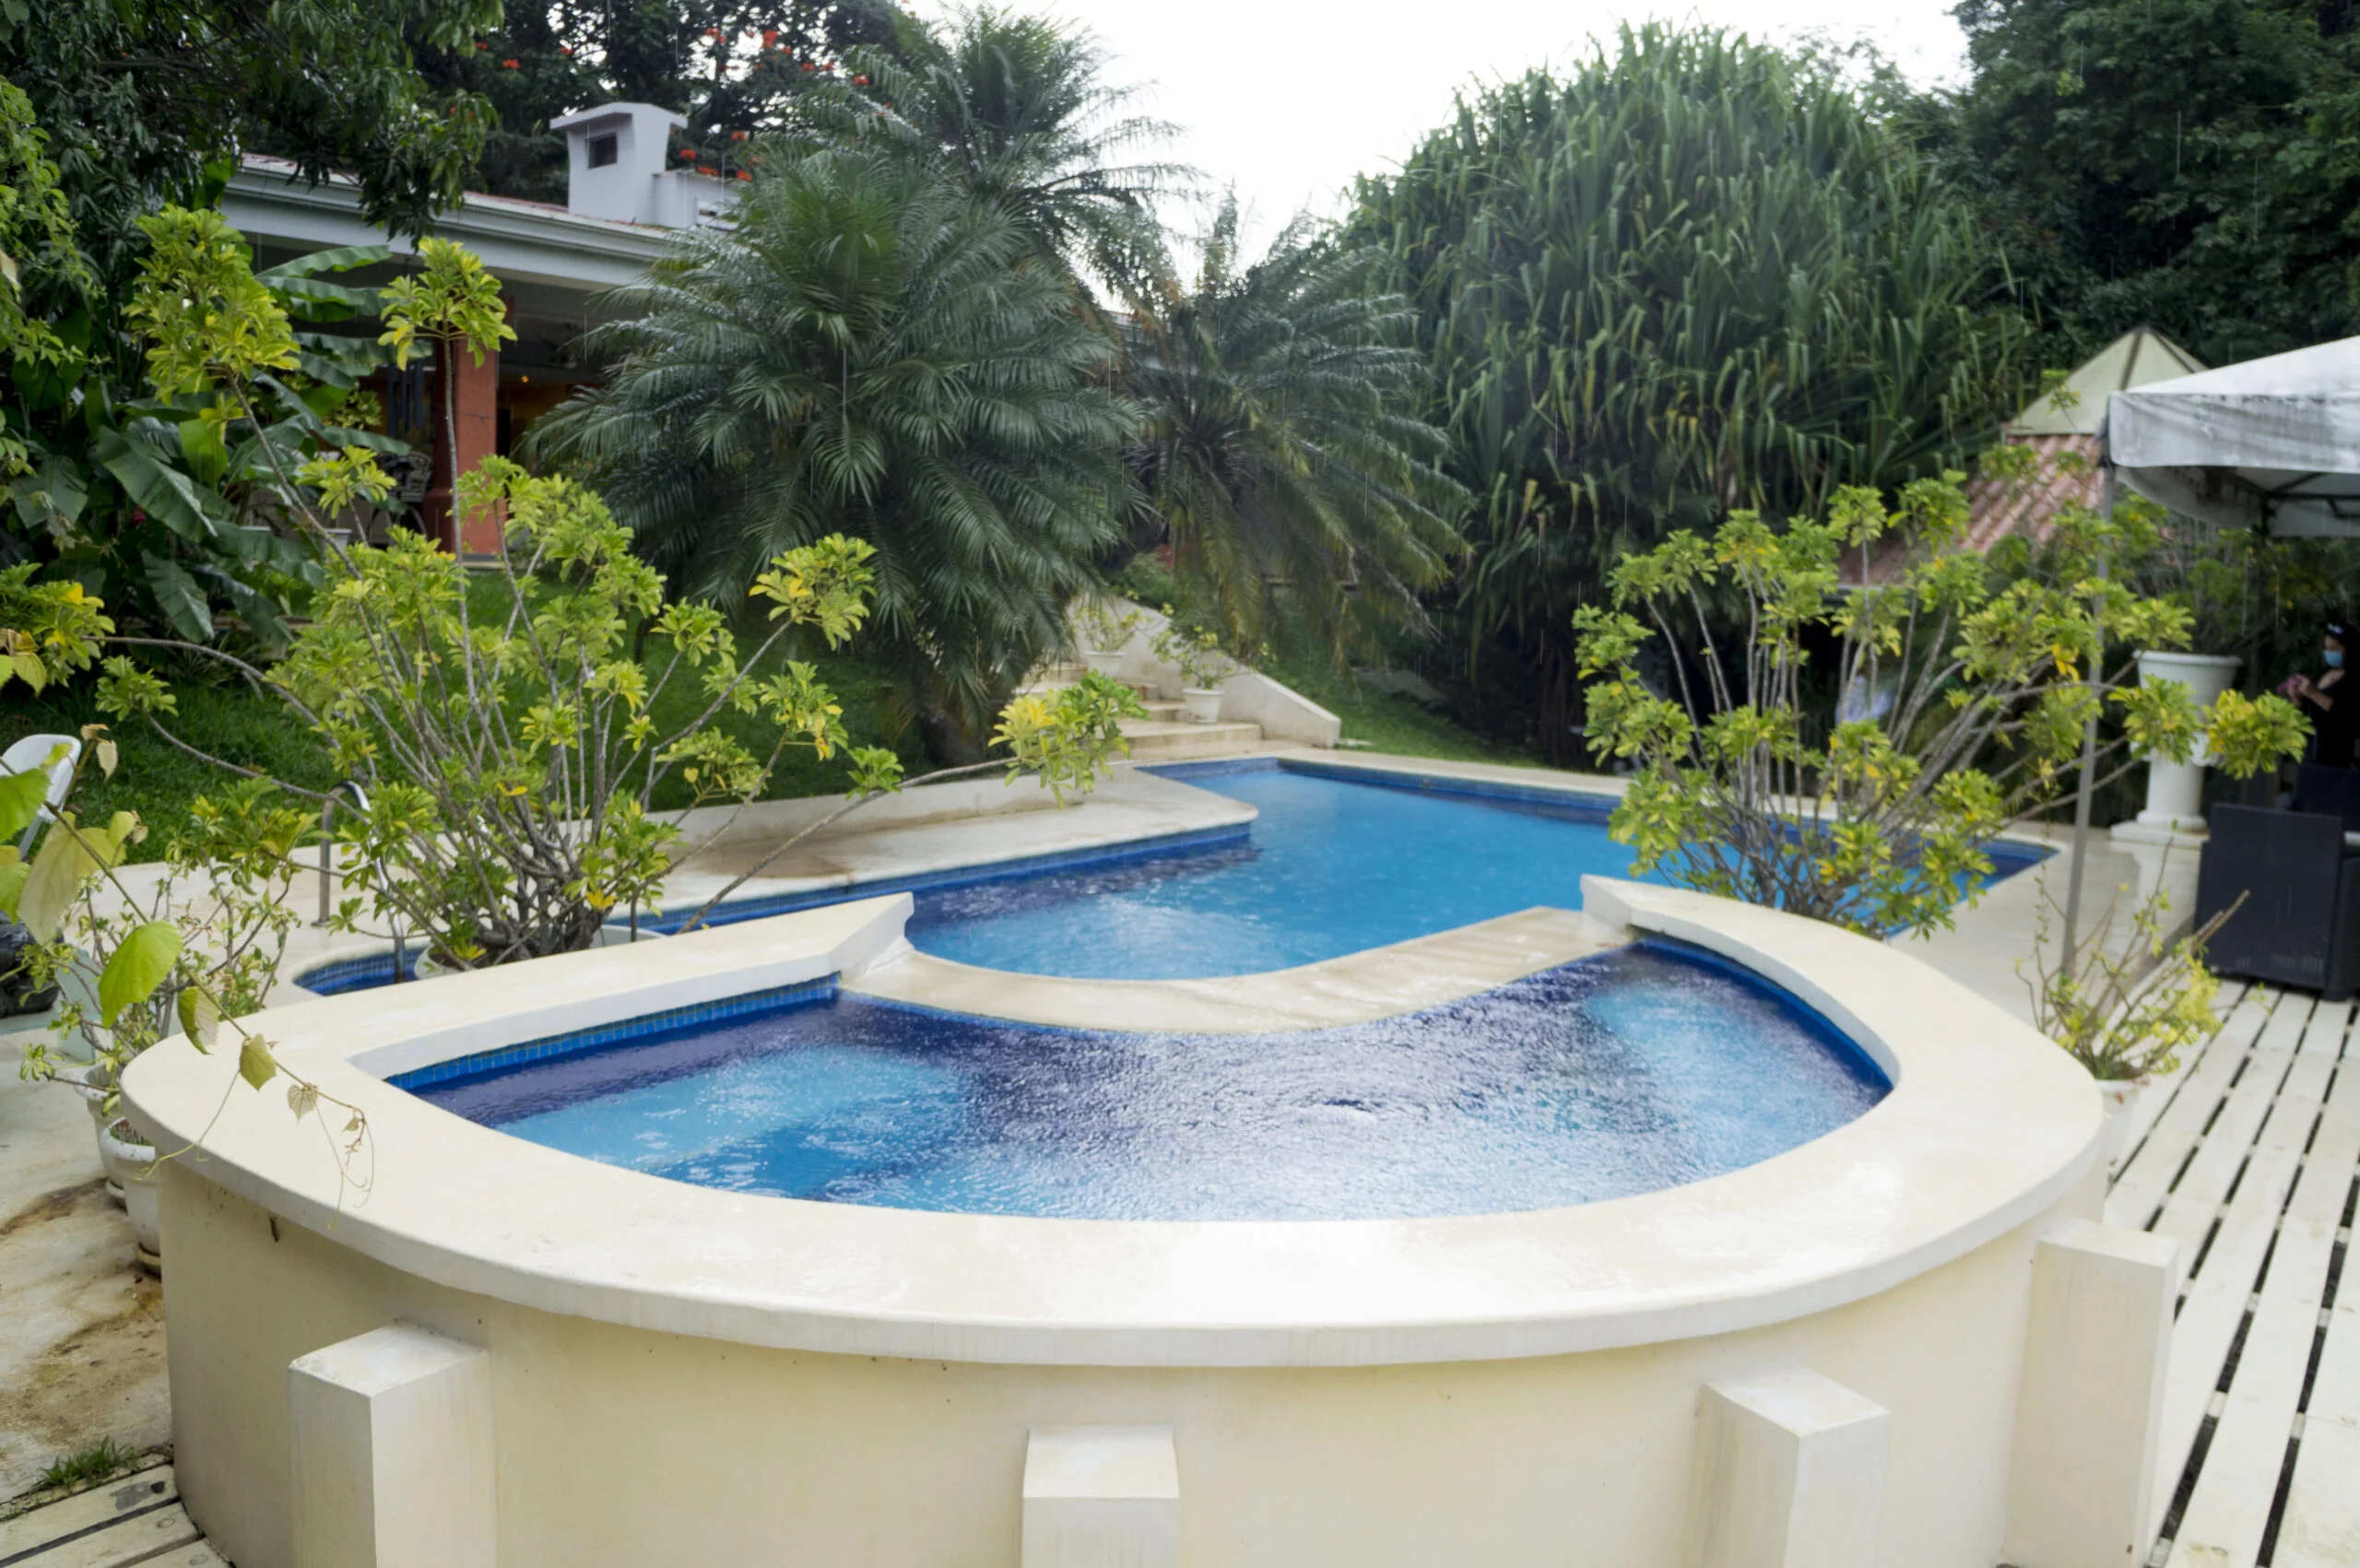 Luxury property for sale with pool and spa in the heart of Escazú.